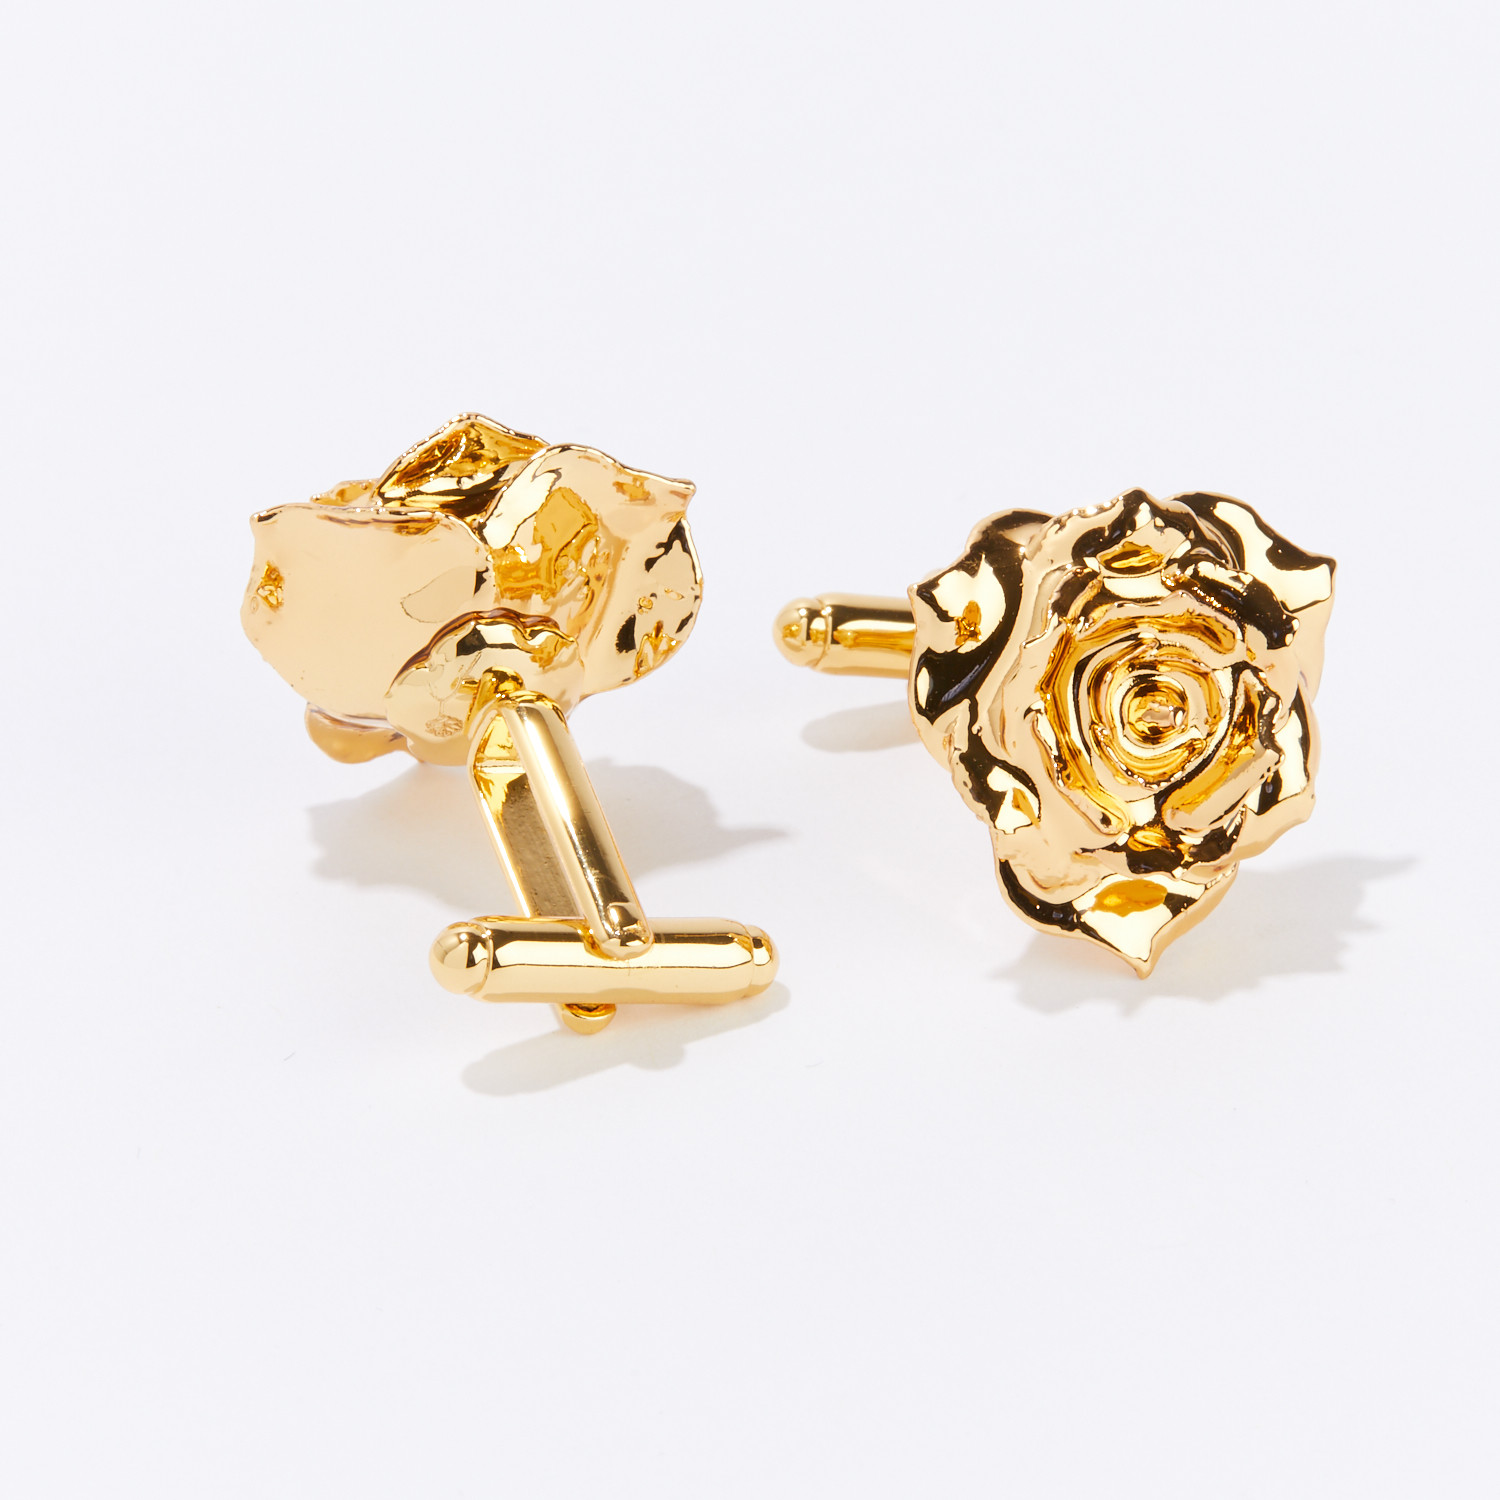 Beautiful One-of-a-kind Real Rose Cufflinks Eternal Rose Real Rose Dipped  in 24K Gold Burgundy Bliss Eternal Cufflinks 